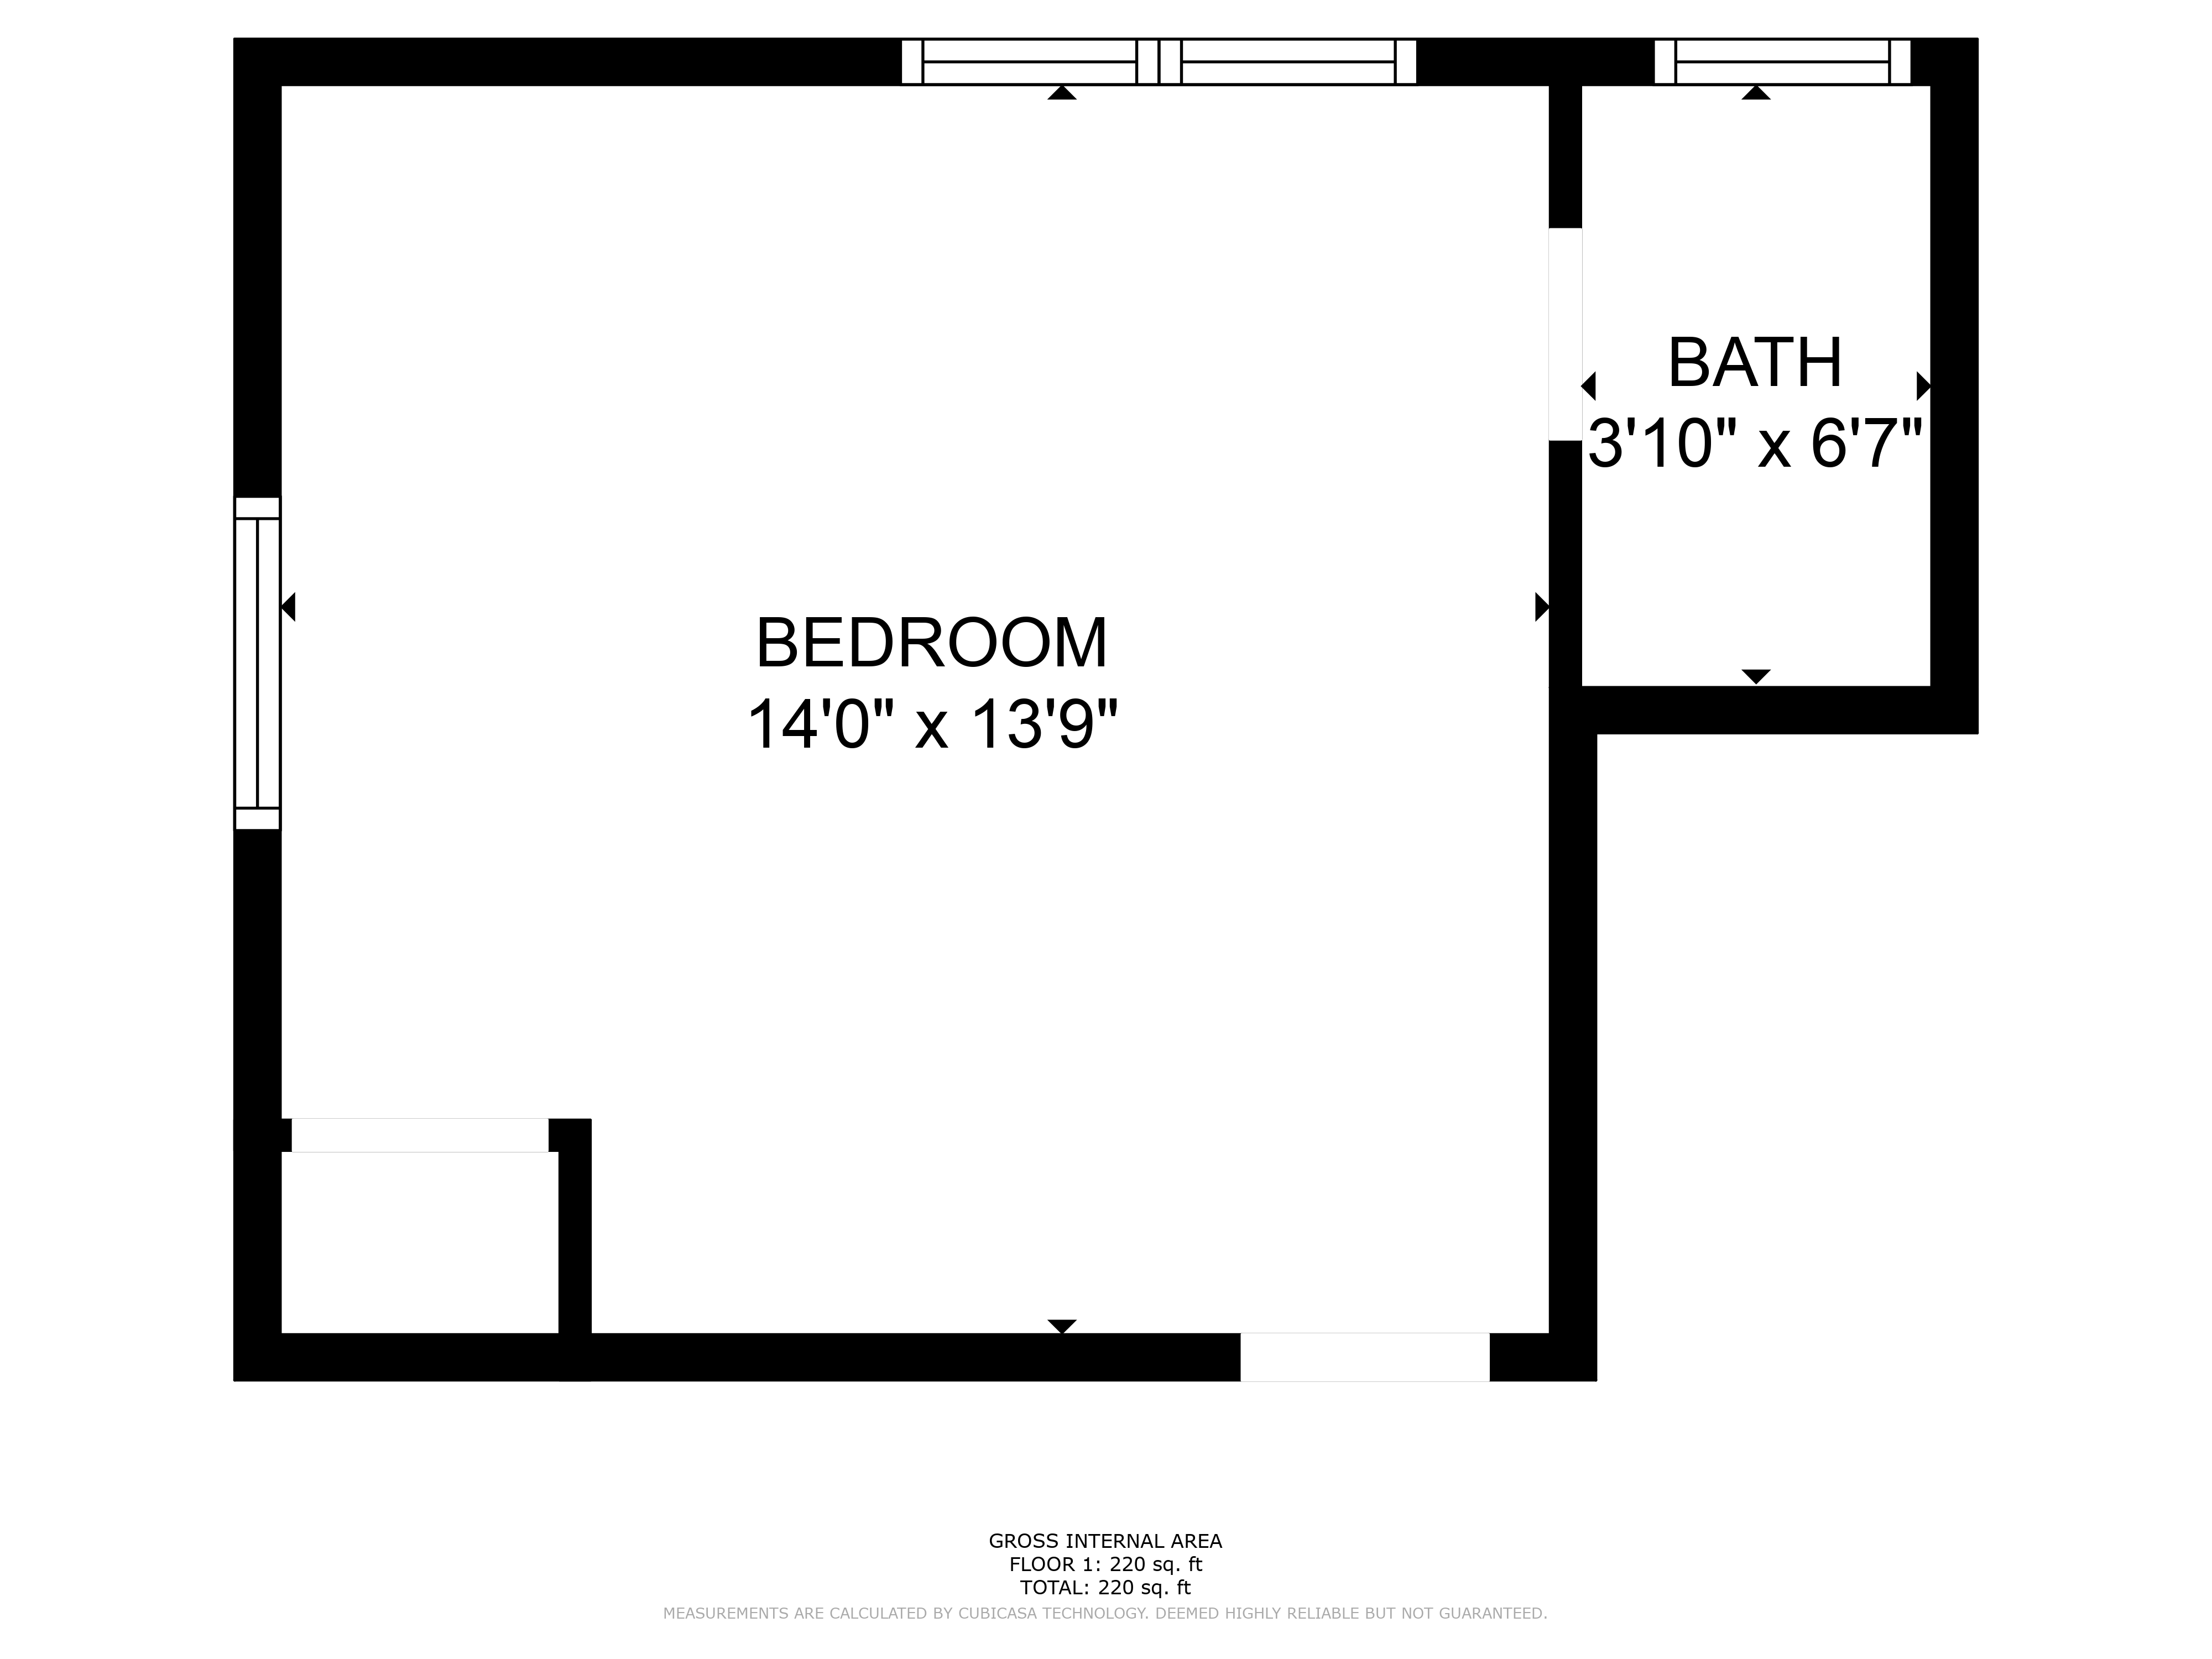 1176 W. 37th St., Los Angeles, California, ,1 BathroomBathrooms,Apartment,For Rent,W. 37th St.,1034